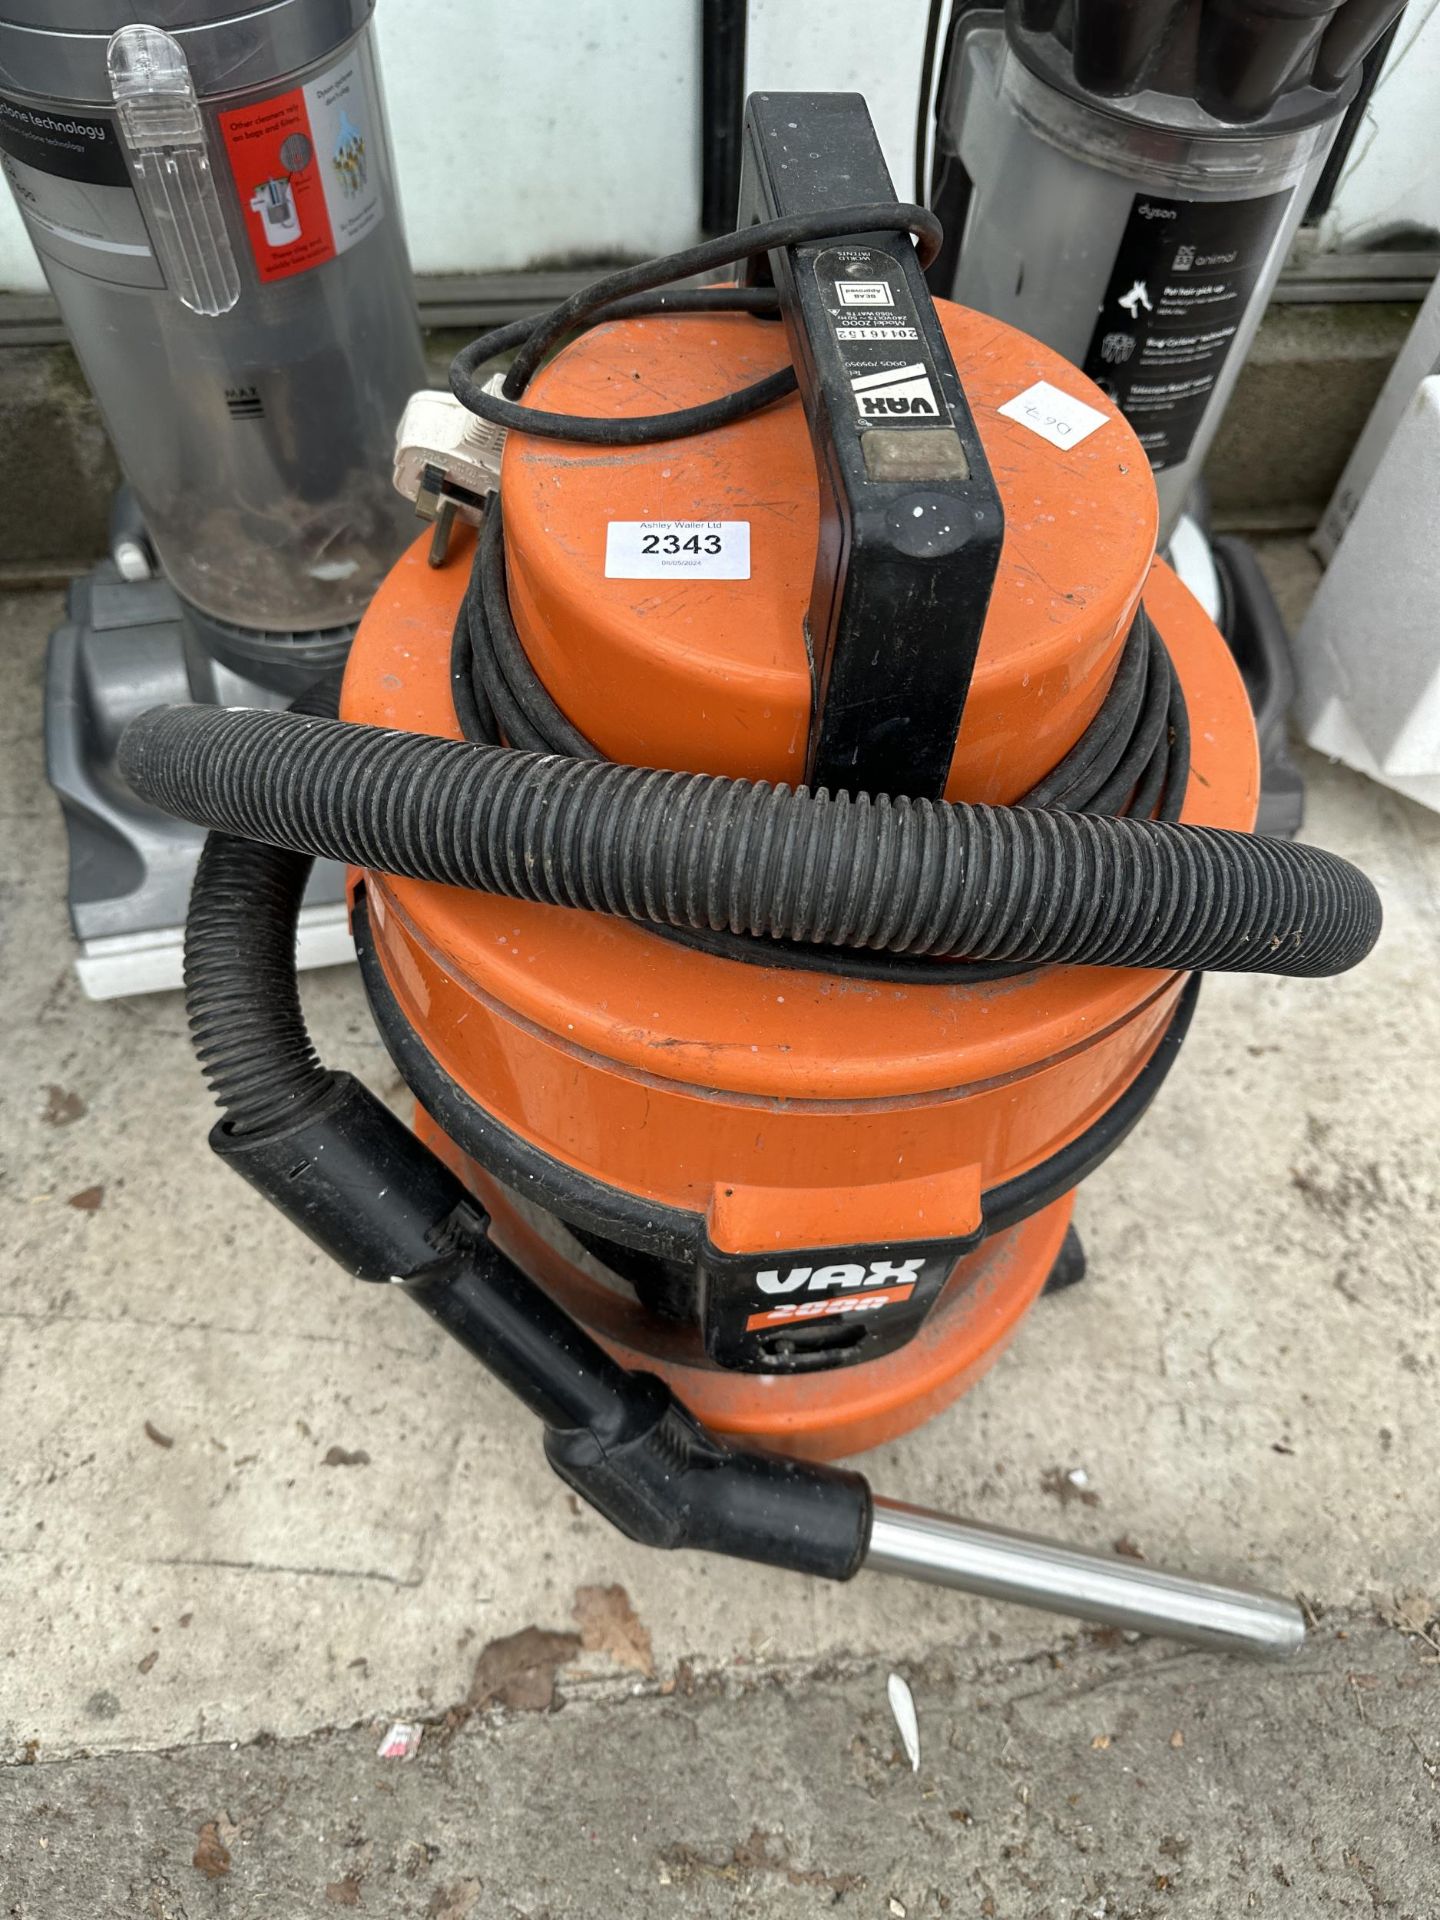 THREE VARIOUS VACUUM CLEANERS TO INCLUDE TWO DYSONS - Image 2 of 4